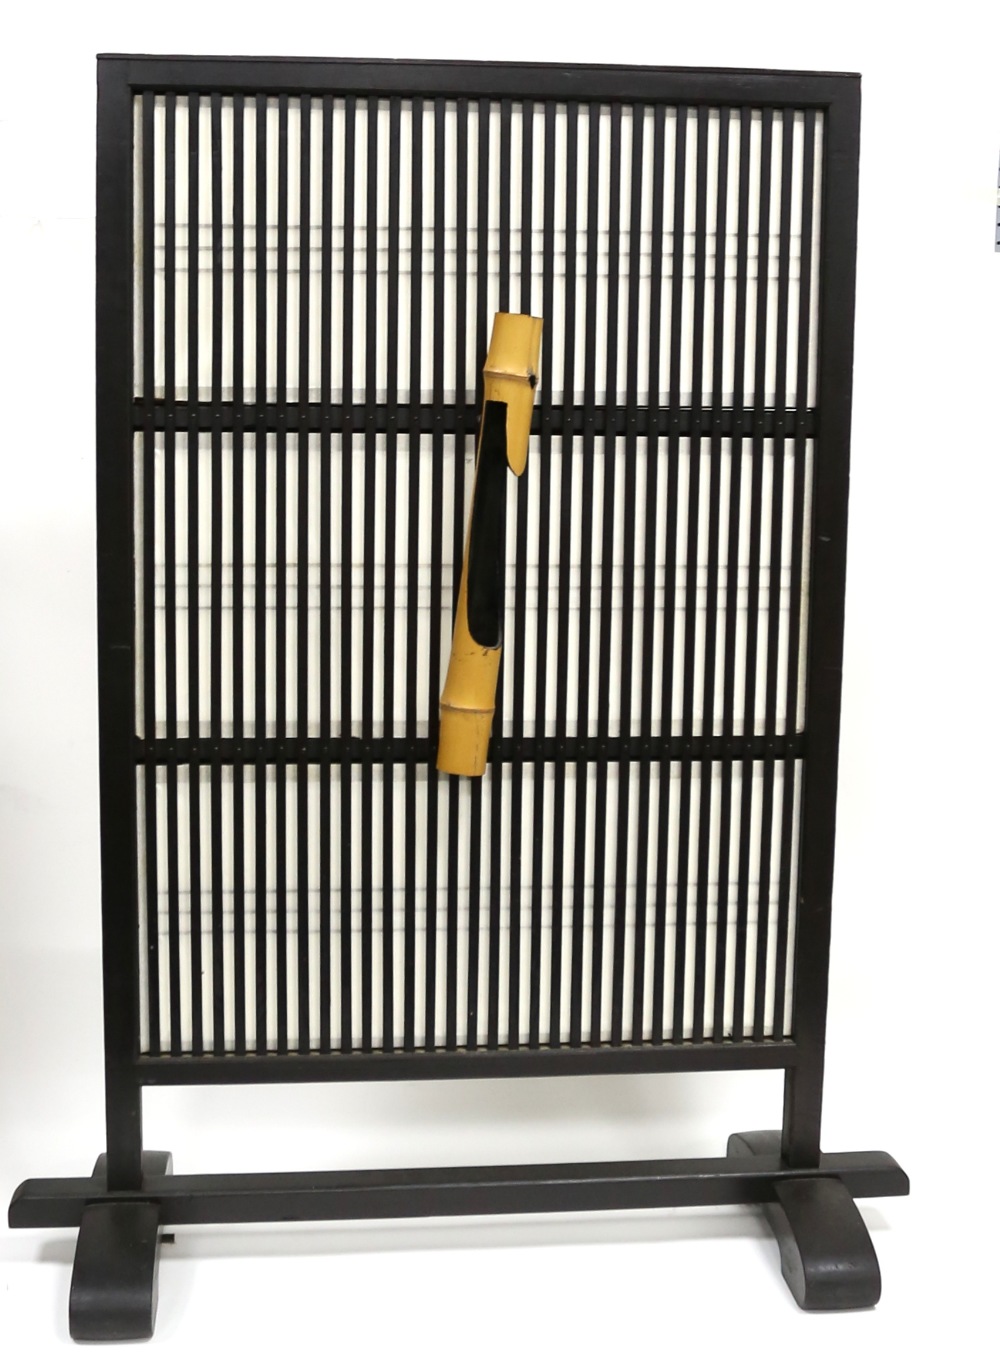 Japanese black lacquered screen 68W x 3D x 102H cm - Image 3 of 4